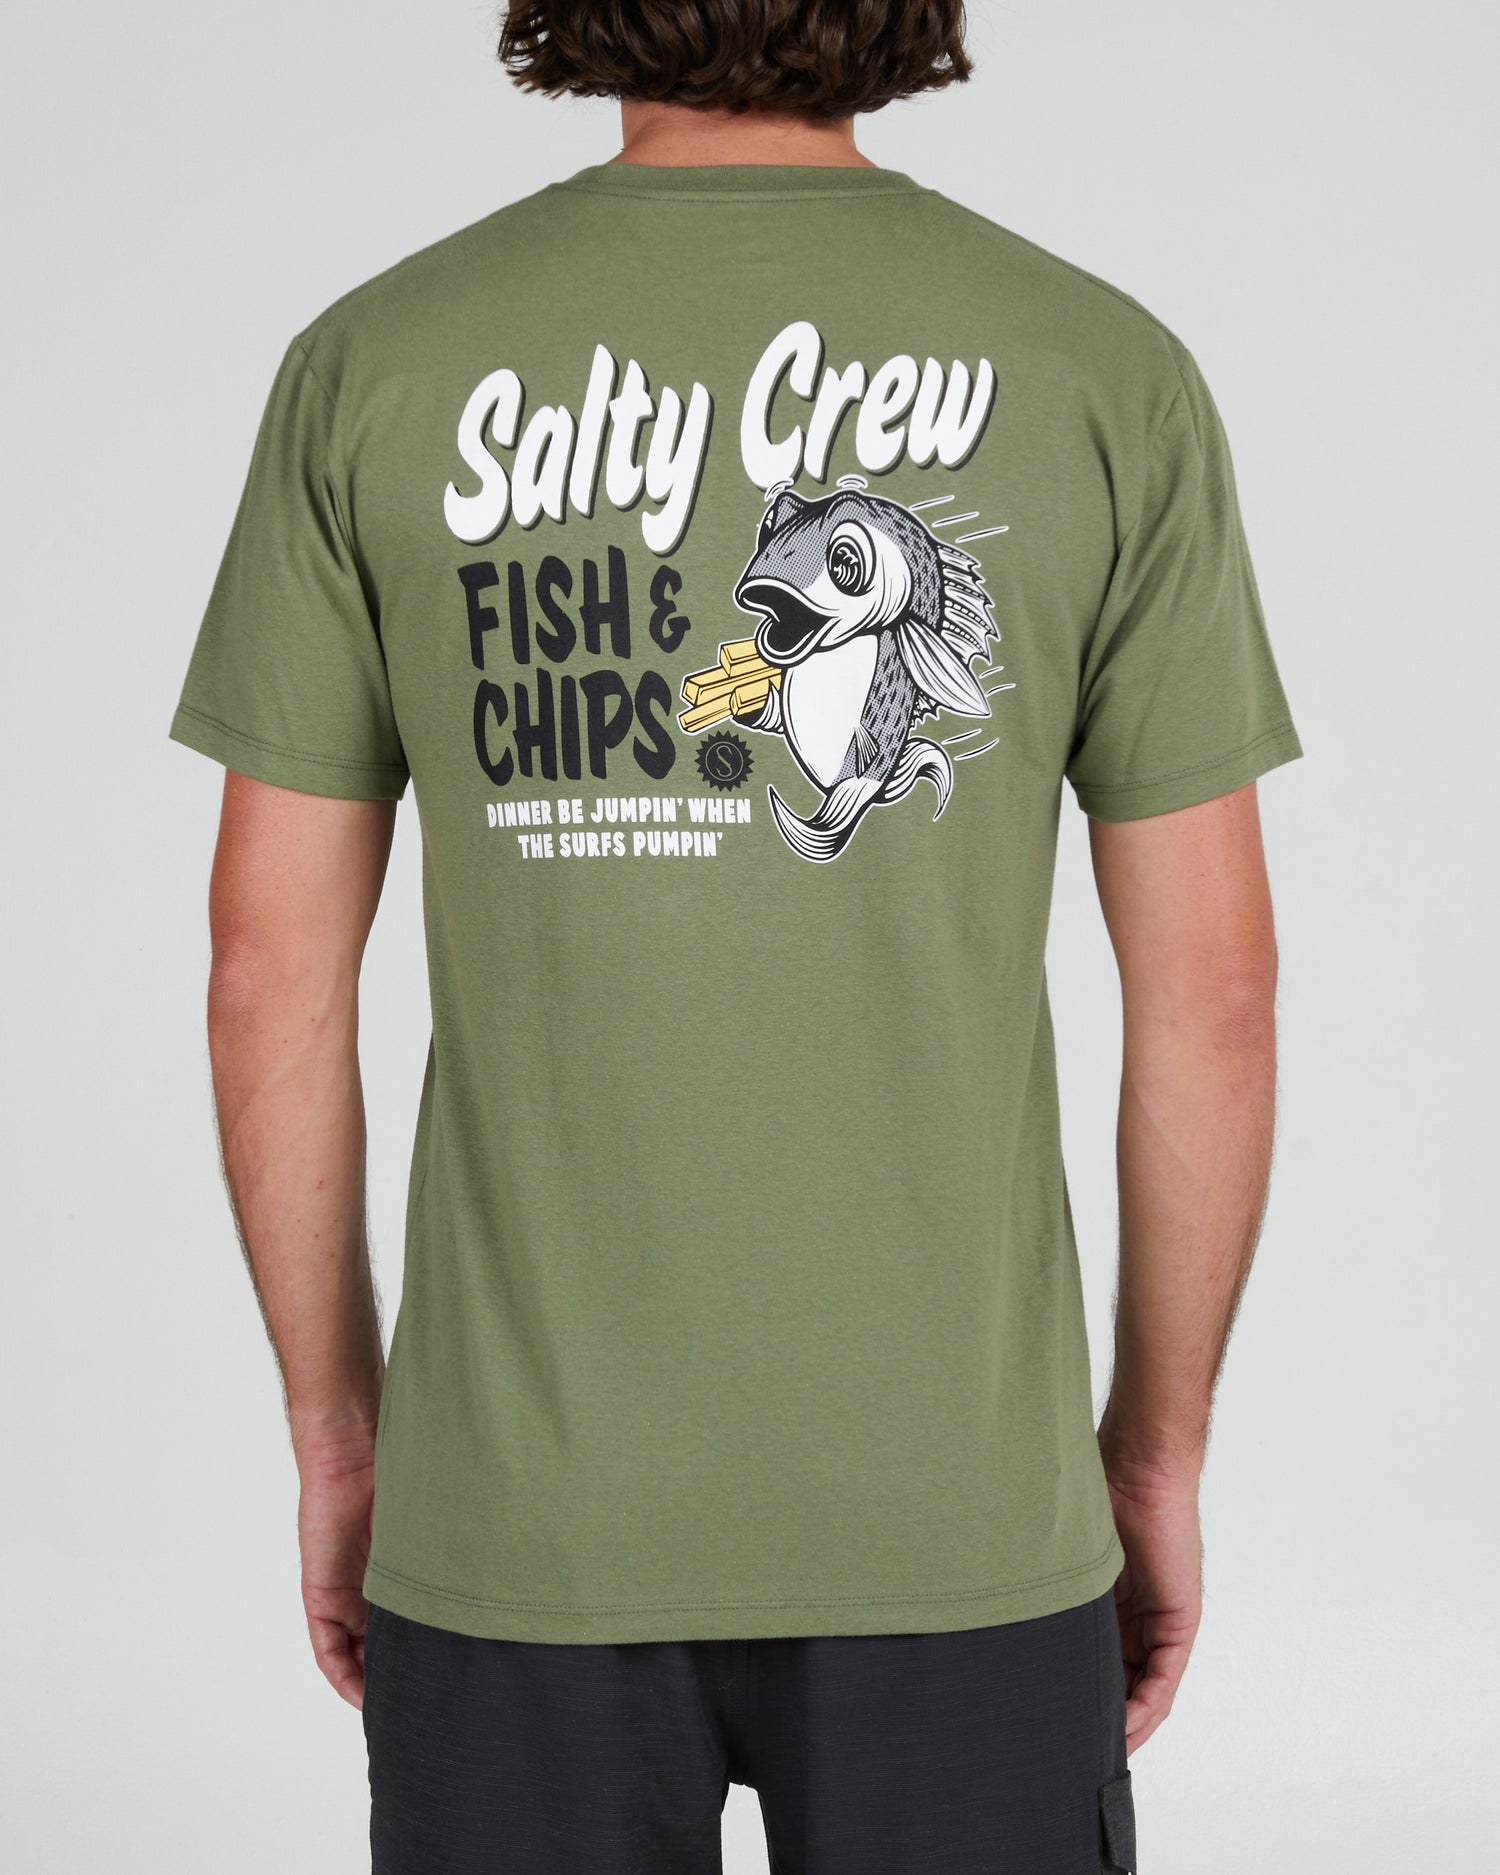 On body back of the Fish and Chips Sage Green S/S Premium Tee